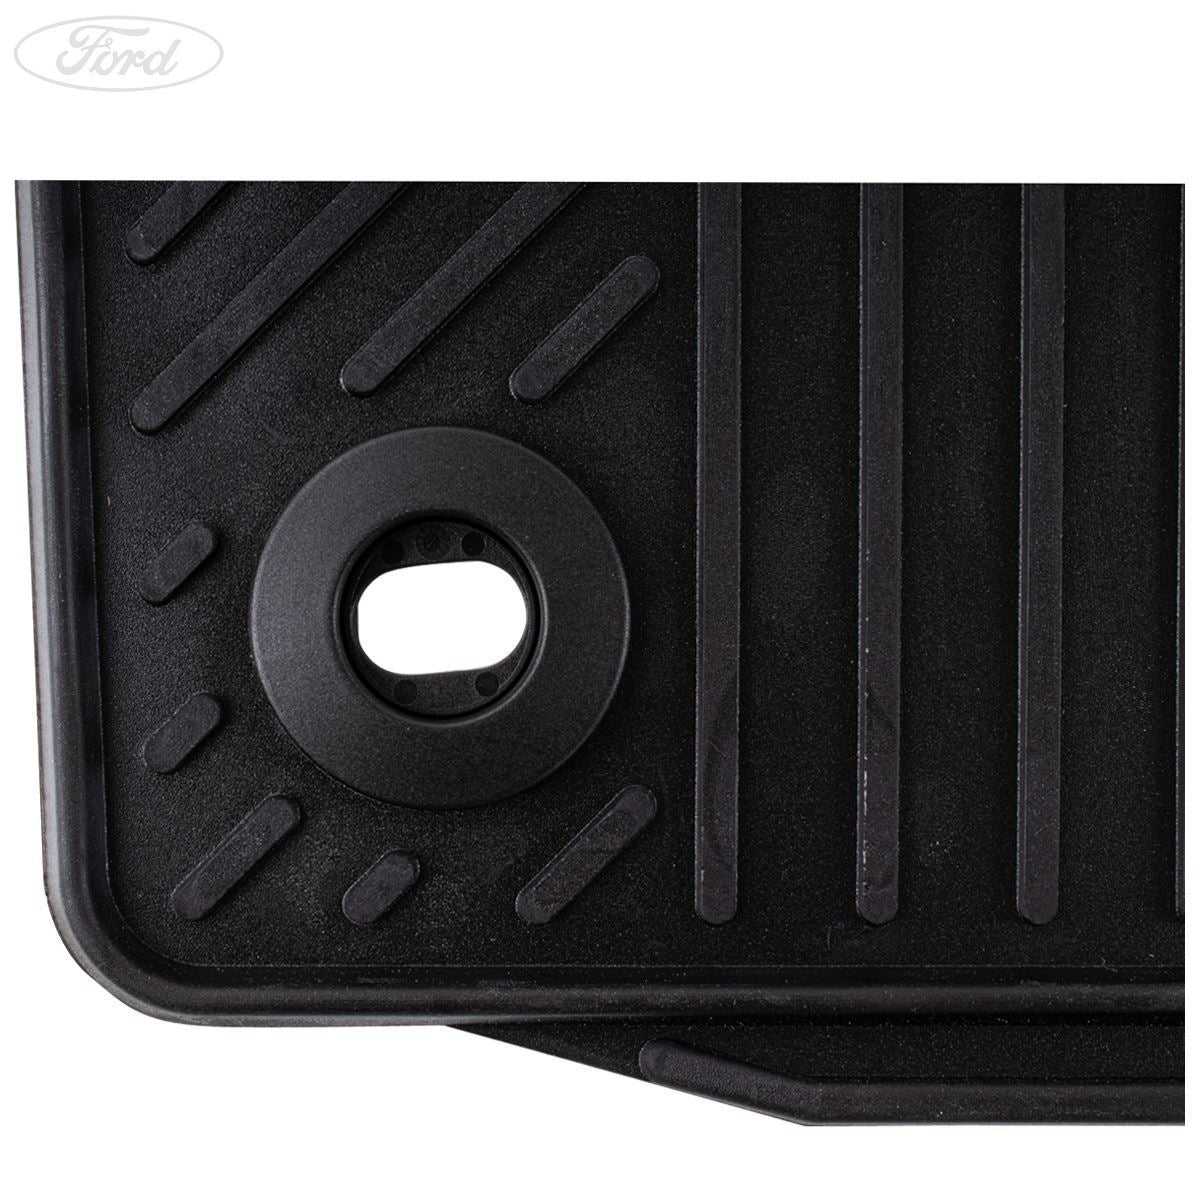 Ford, TRANSIT MK7 FRONT RUBBER FLOOR MATS SET WITH LOGO 2006-2014